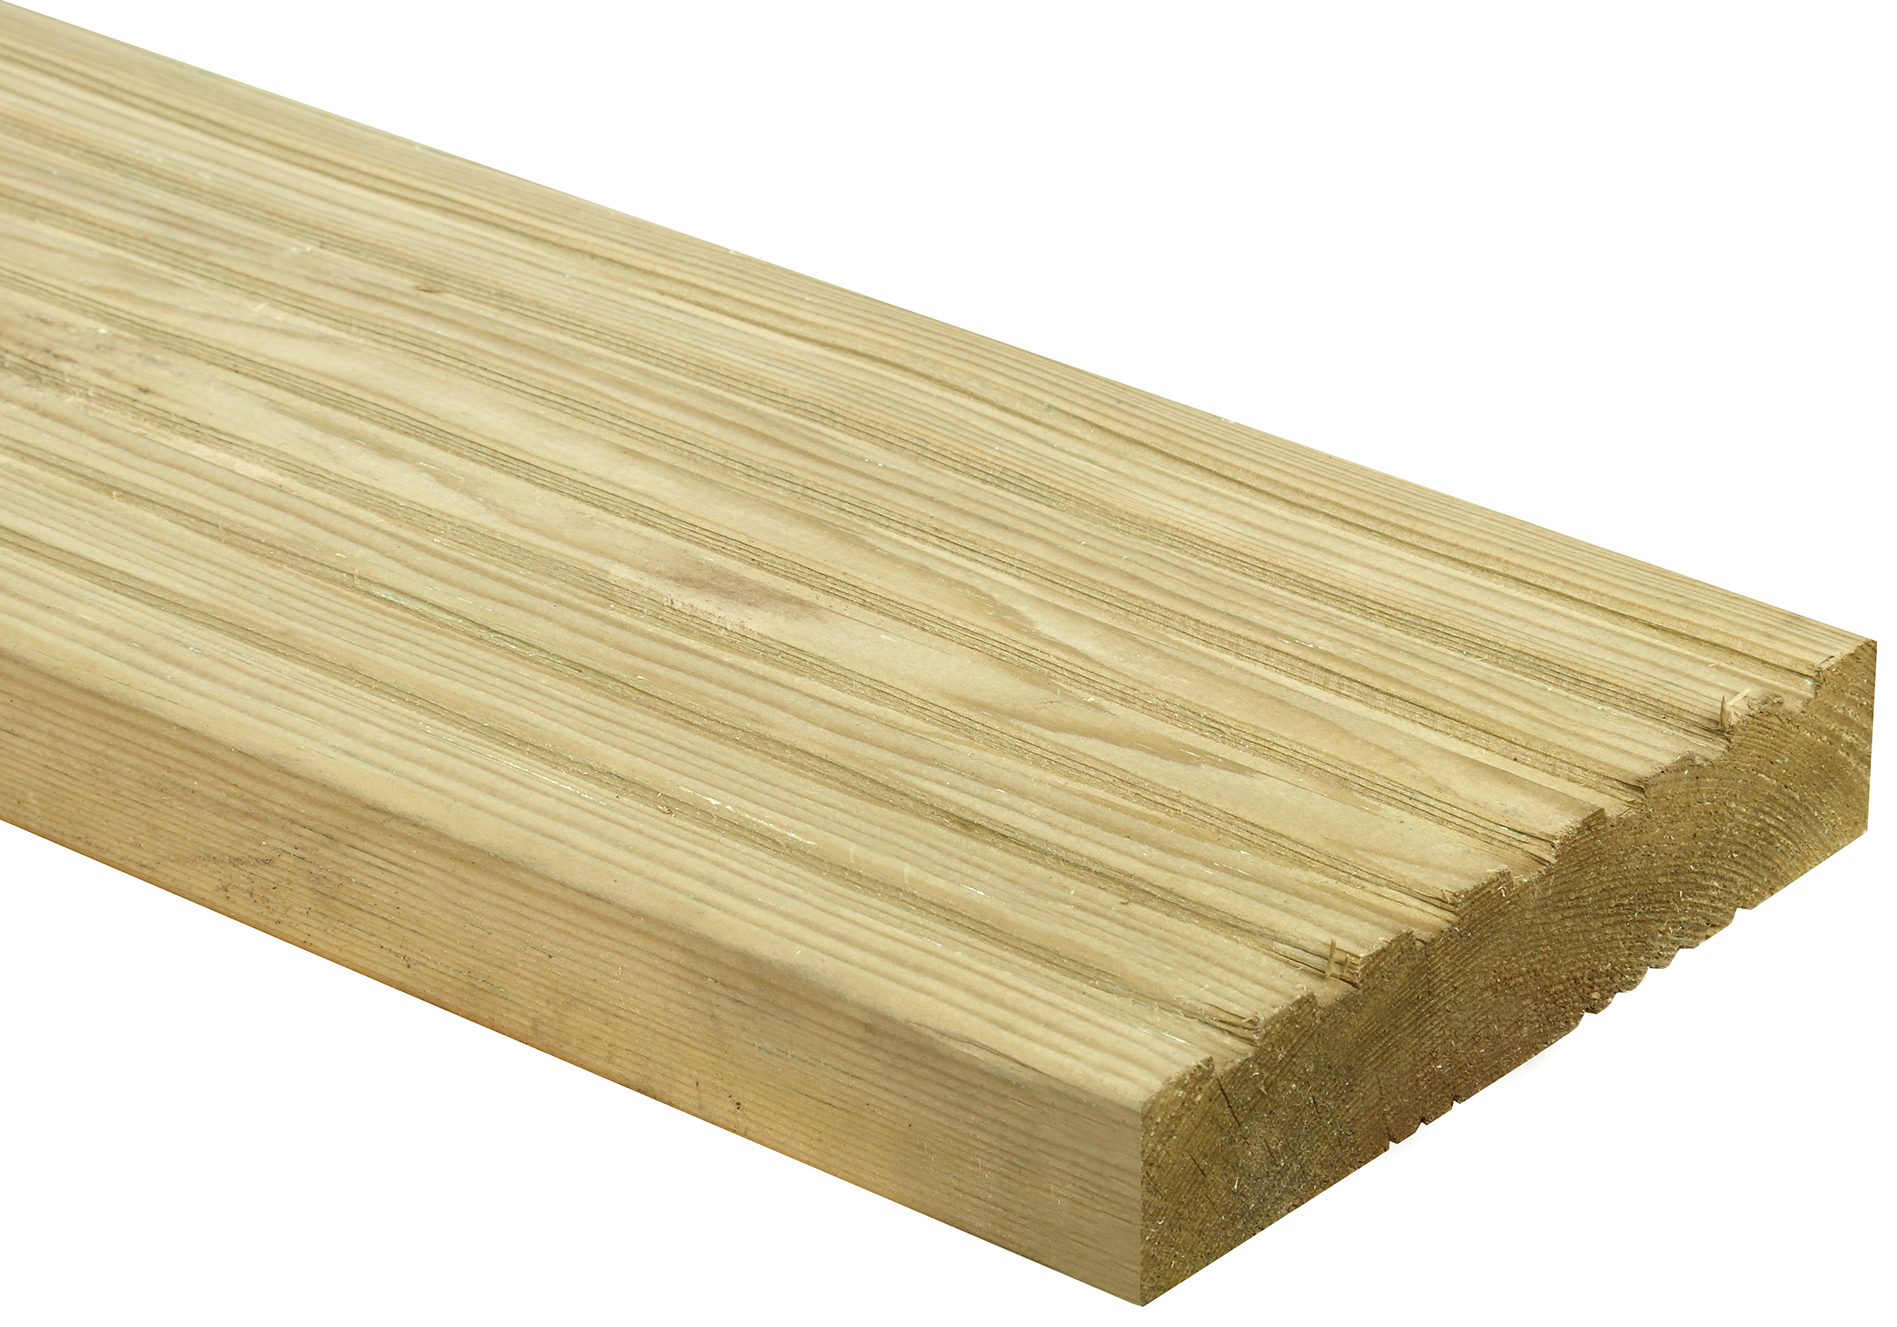 Image of Wickes Premium Natural Pine Deck Board - 28 x 140 x 4800mm - Pack of 40